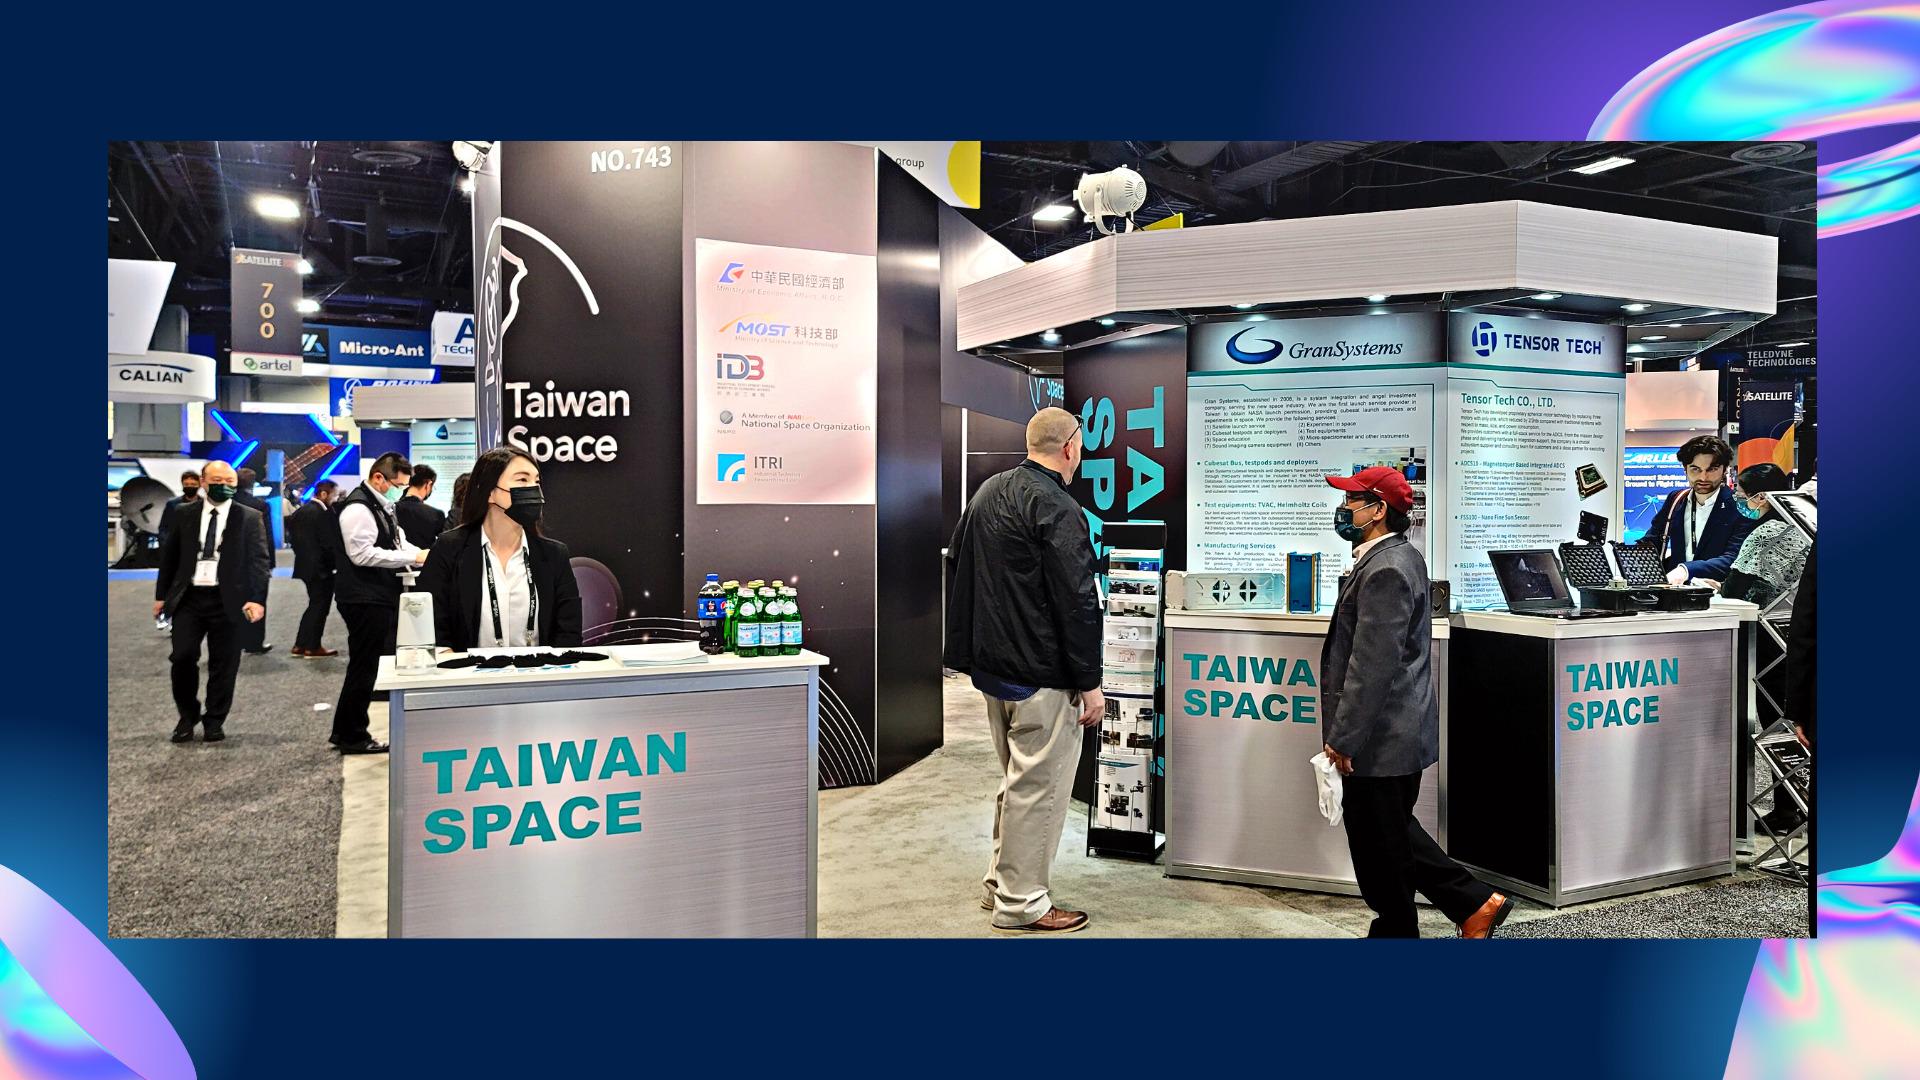 Wang Yi Design, Exhibition Design, Booth Design, TaiwanSpace Taiwan Image Hall, ITRI Industrial Research Institute, Satellite2022, US Satellite Communication Exhibition